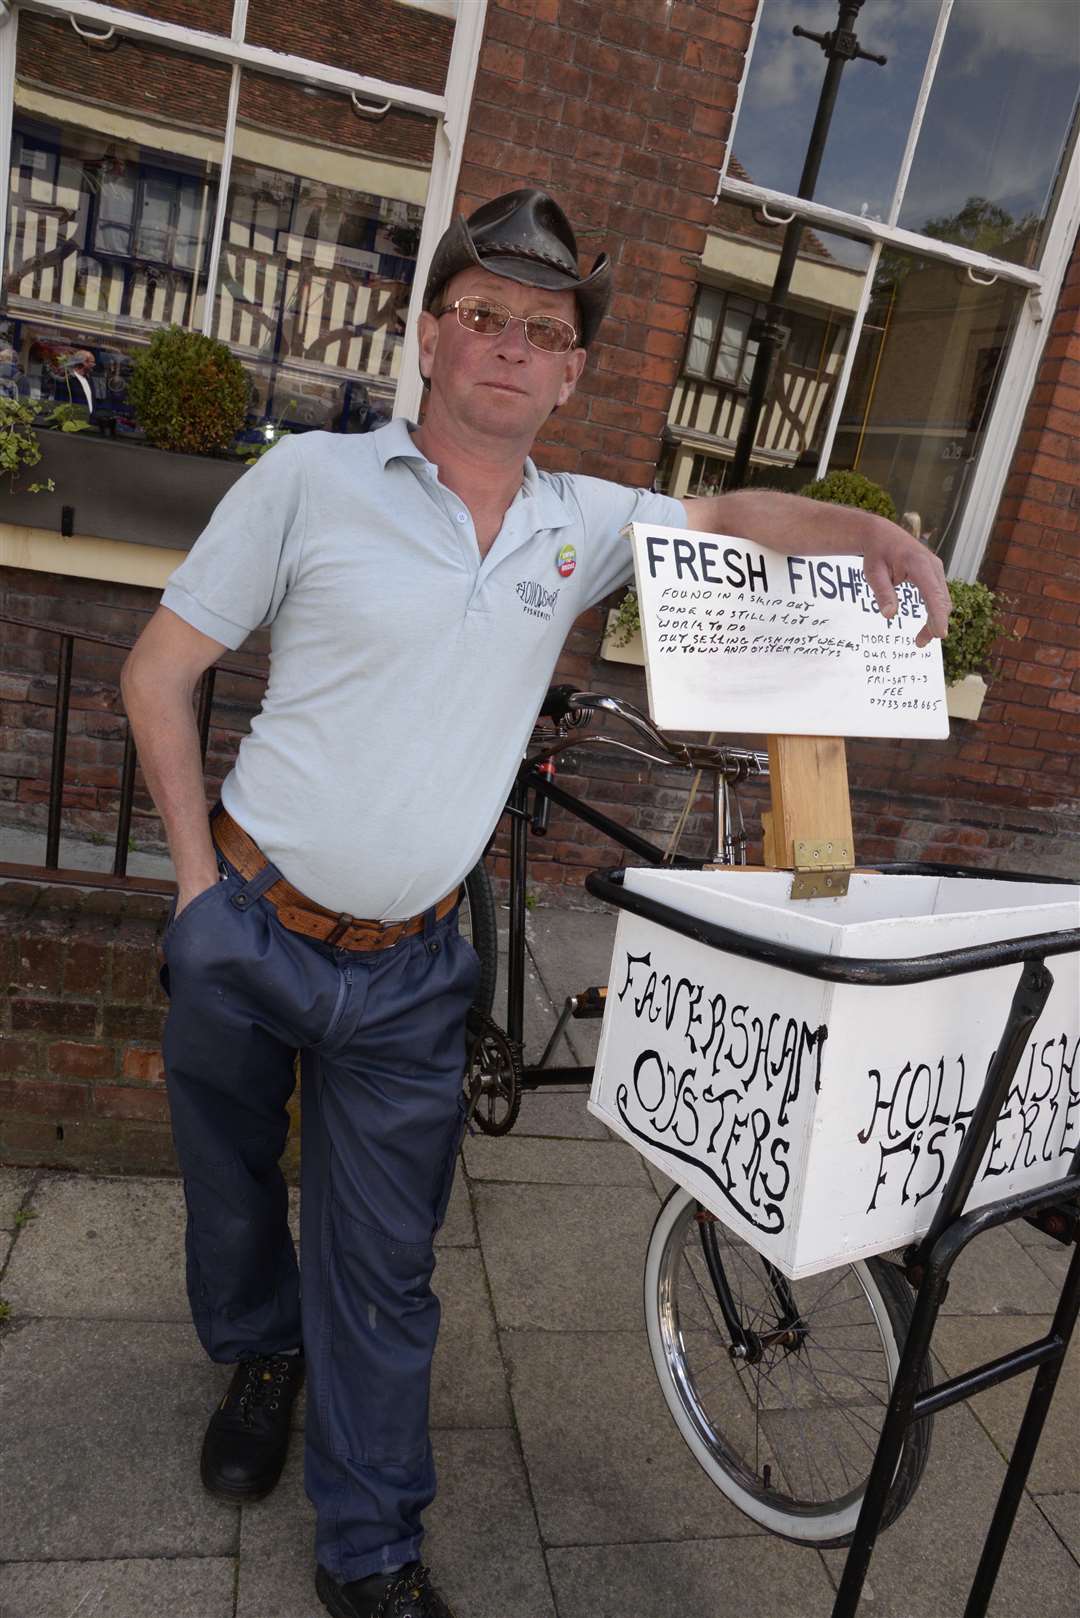 Mark with his 1920 vintage Pashley trade bike which has been stolen.